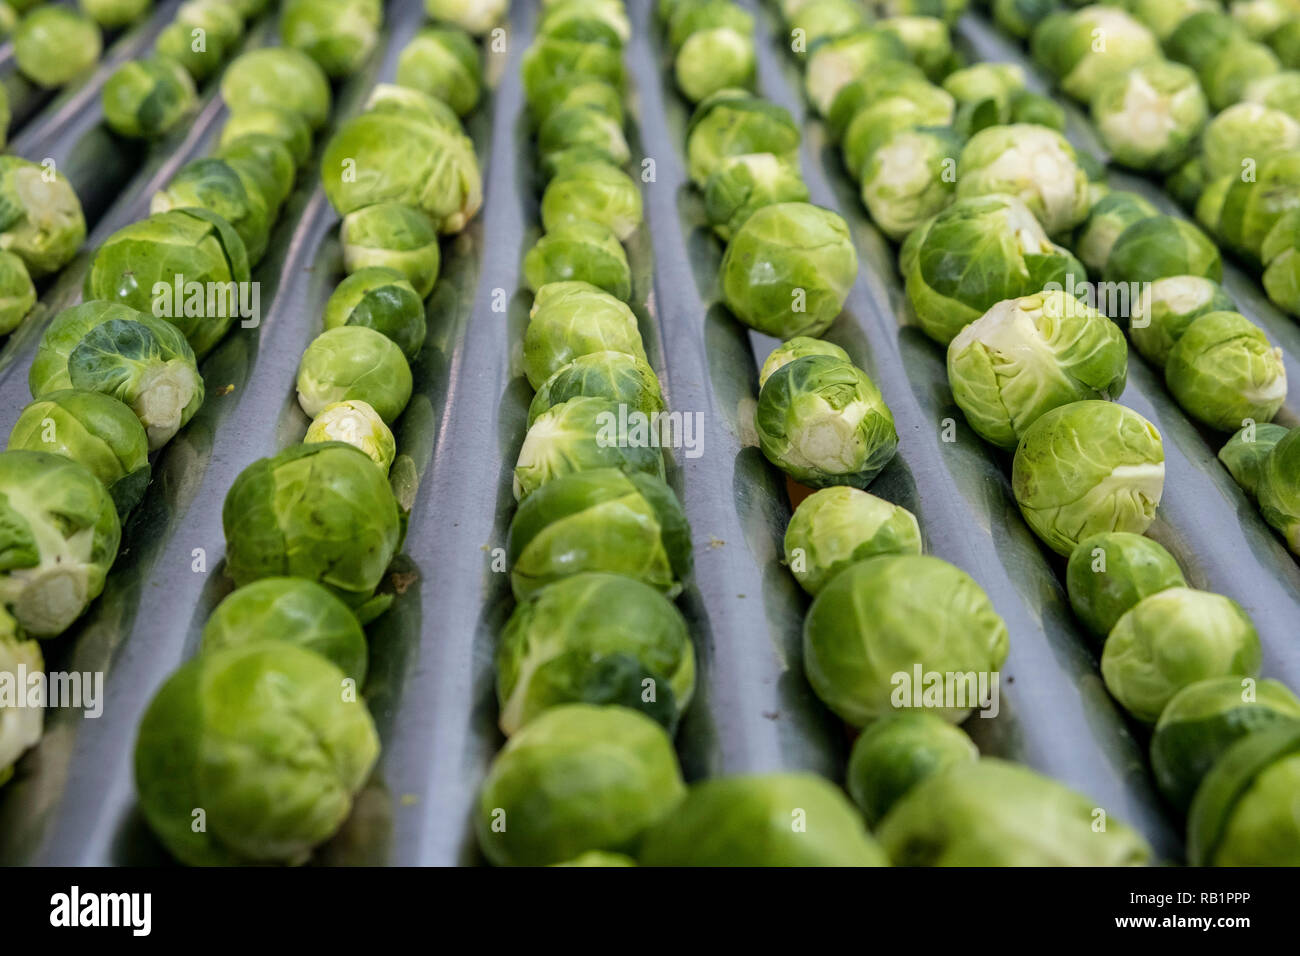 Production line of Brussel Sprouts in factory Stock Photo